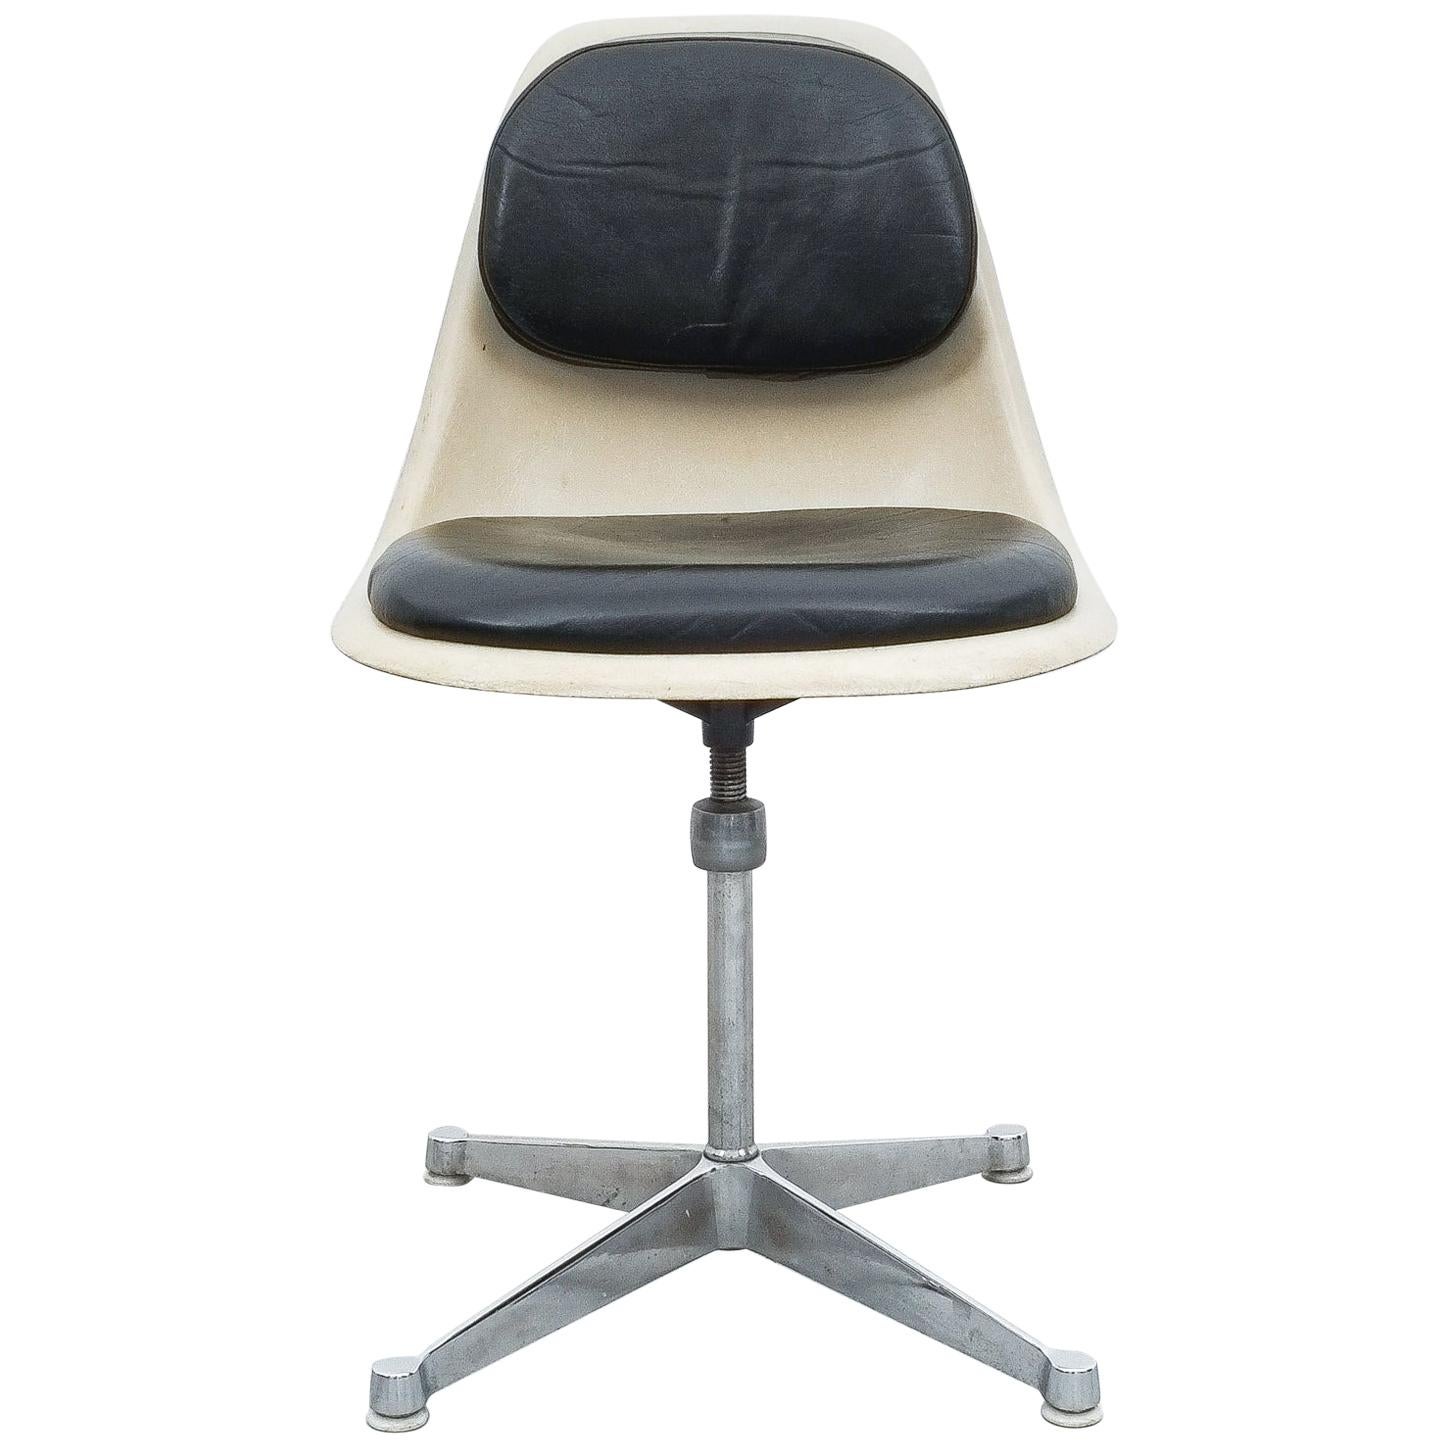 PSCC4 Fiberglass Swivel Chair for Miller Ray and Charles Eames, circa 1960